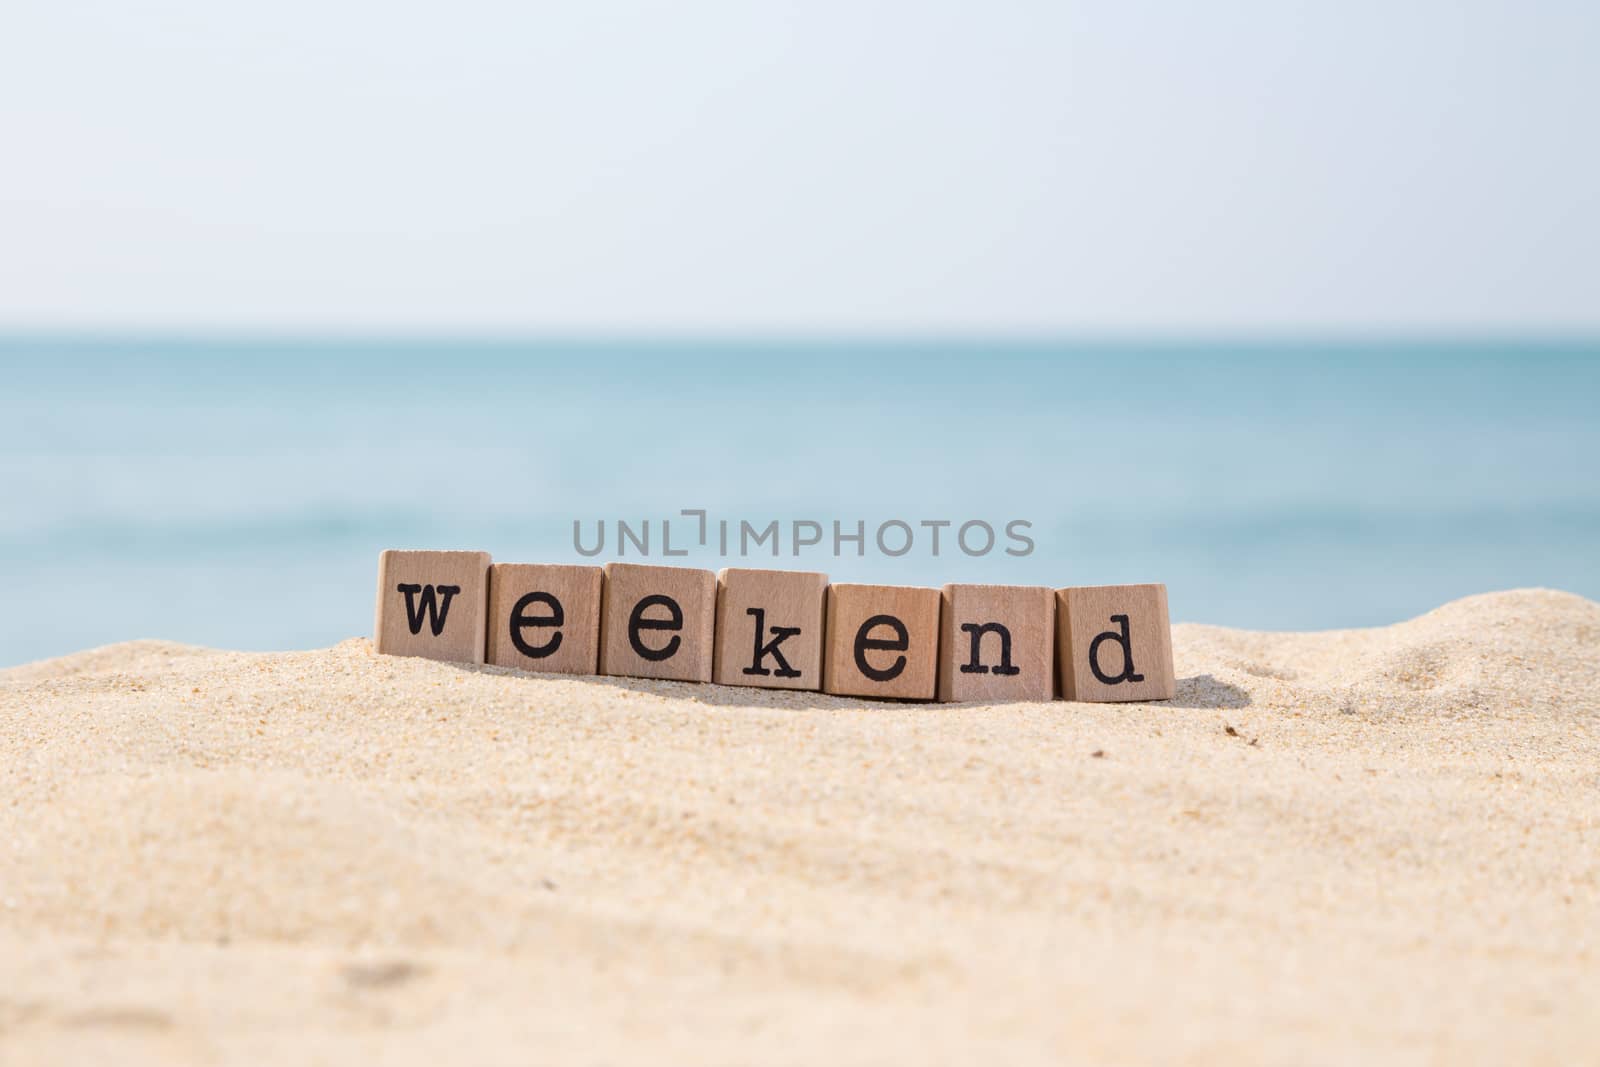 Weekend word on wood rubber stamps stack on the sand beach for vacation and summer season concept, beautiful ocean view during daytime on a sunny day with blue sky on background